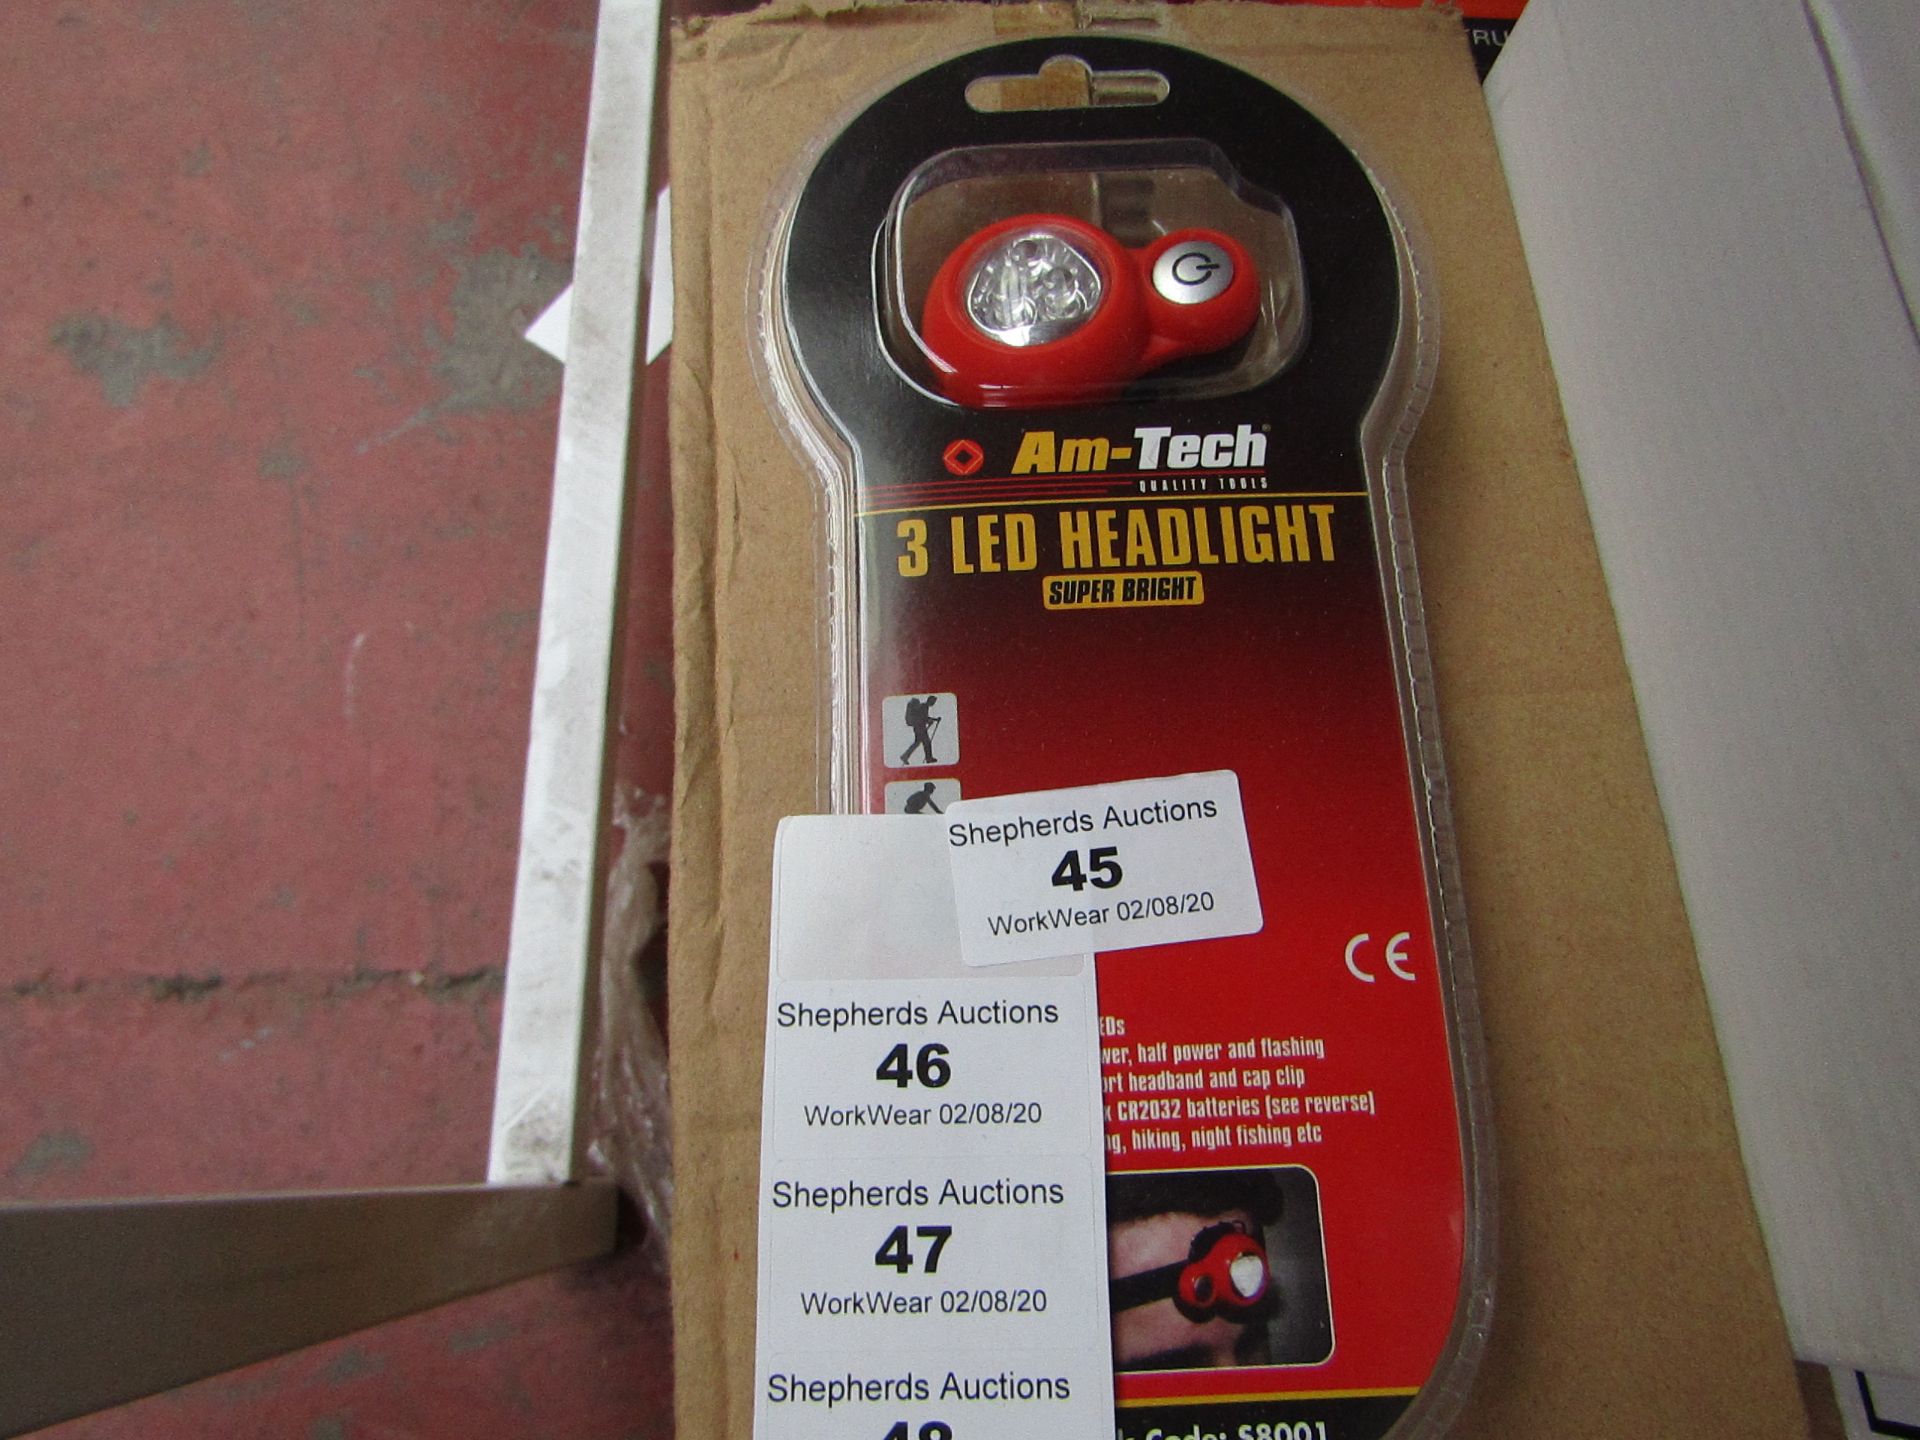 Am-Tech - 3 LED Headlight (Super Bright) - New & Packaged.